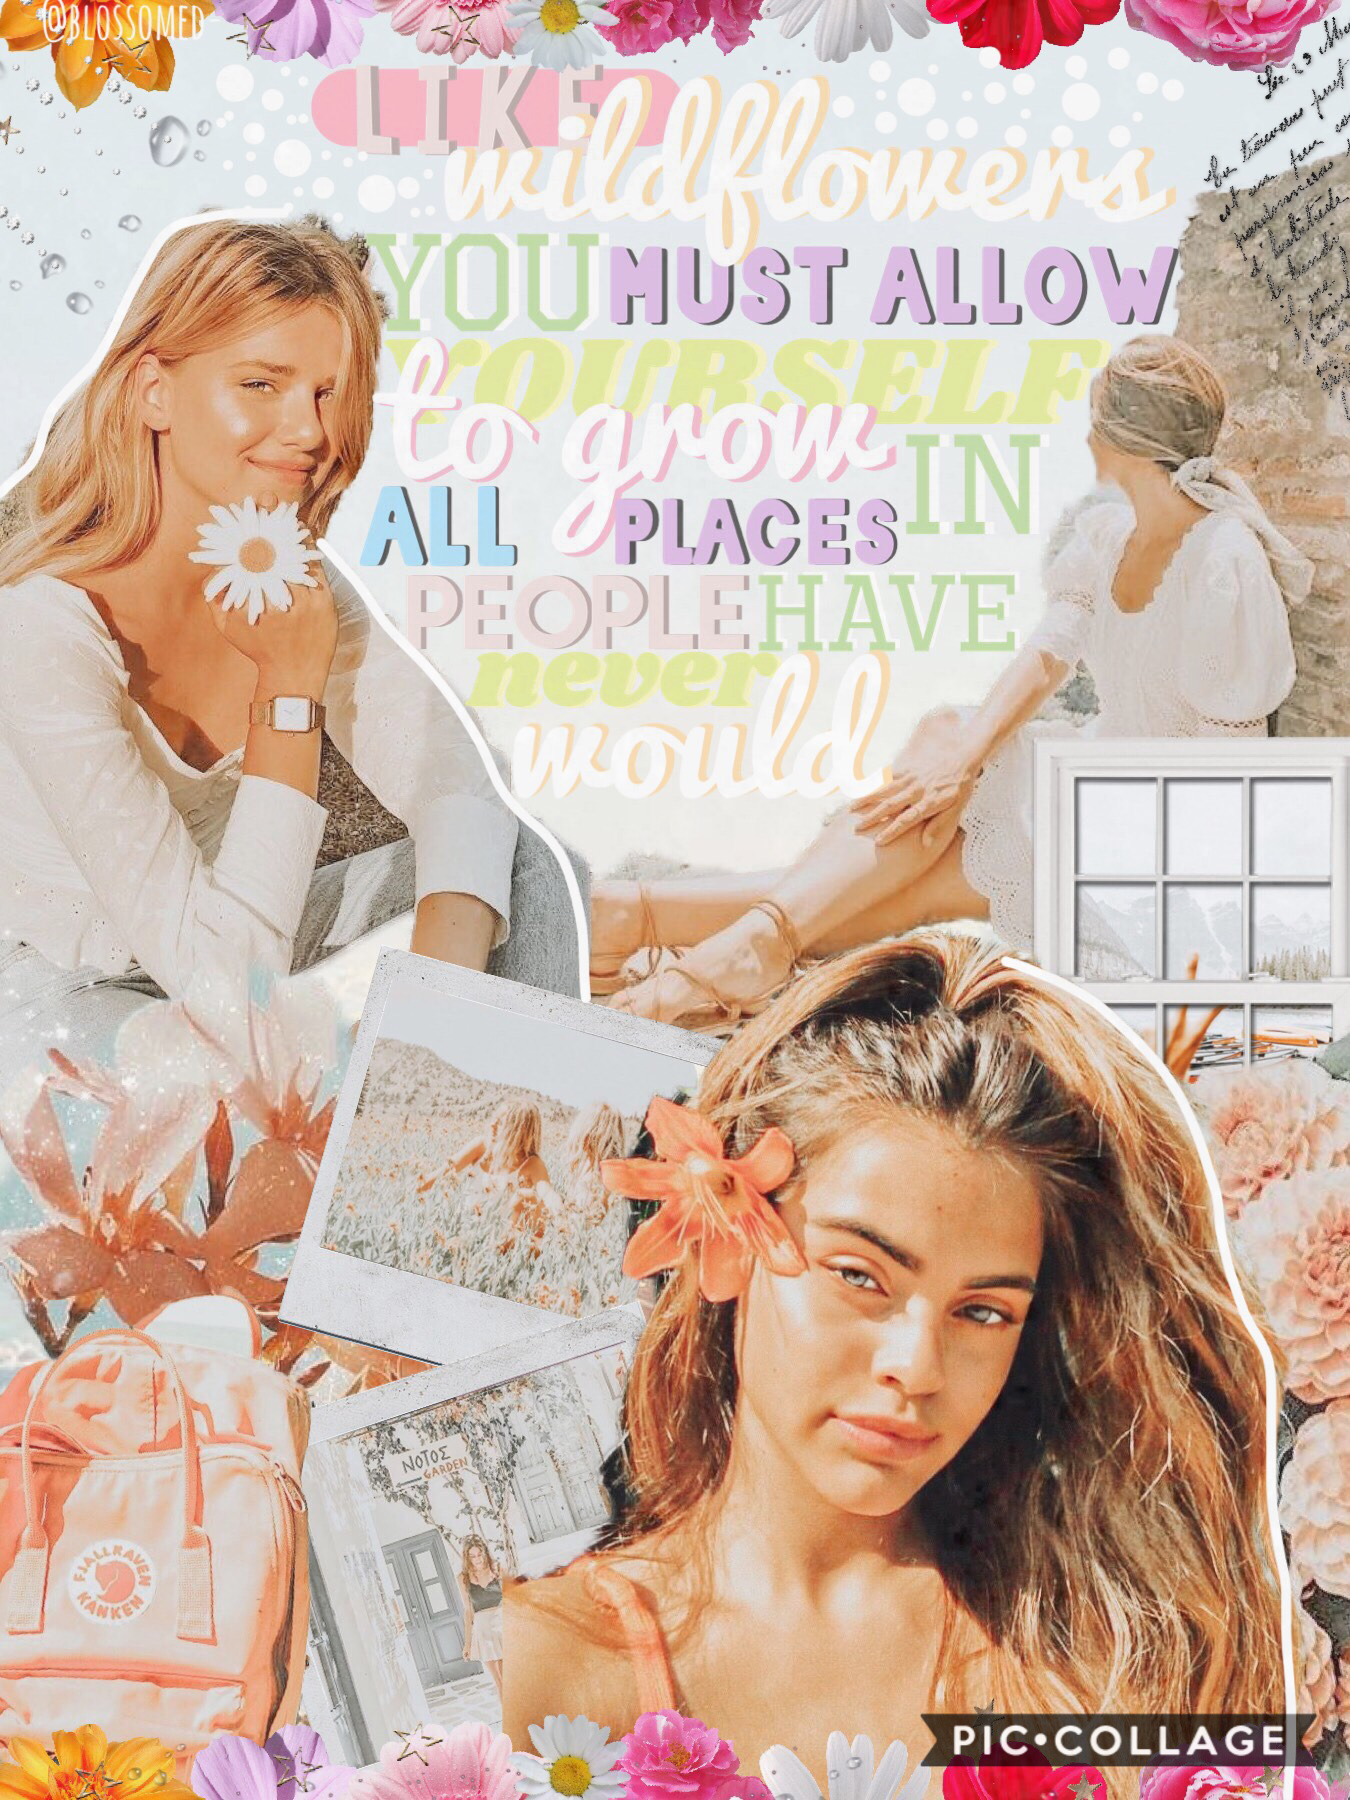 🌷 grow like wildflowers tap! 🌷
hiya guys! how are you? 🥰 I’m so so sorry for not posting like I normally do😣 I’ve had school, but I’ll definitely post more💗 thank you for all your comments, what do you think of this? comment below👇how many comments can we